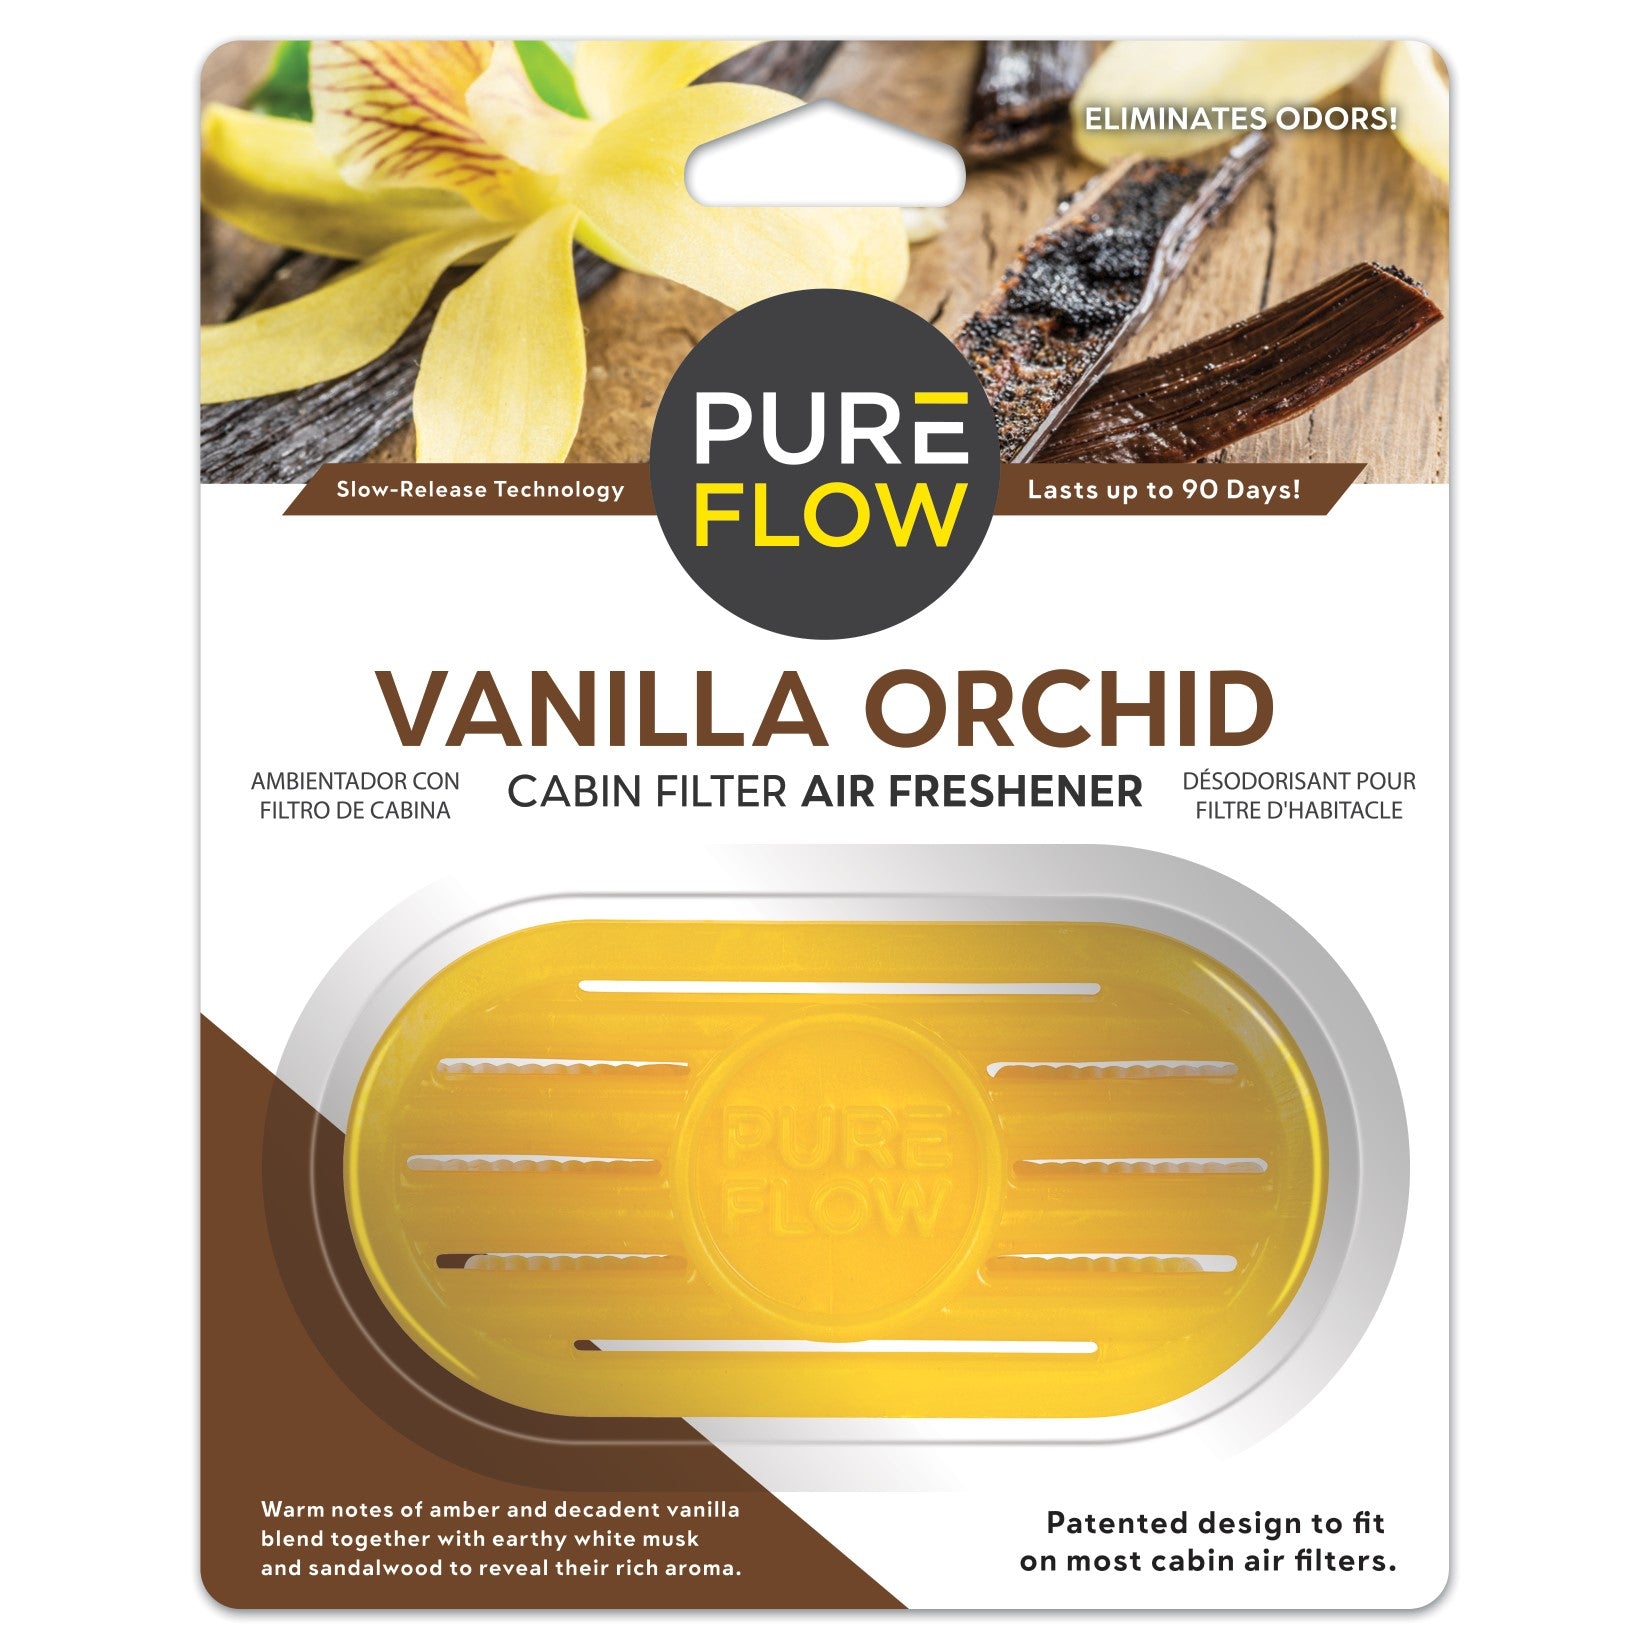 Vanilla Orchid, PureFlow Cabin Filter Air Freshener with Odor Eliminator, 1 Pack